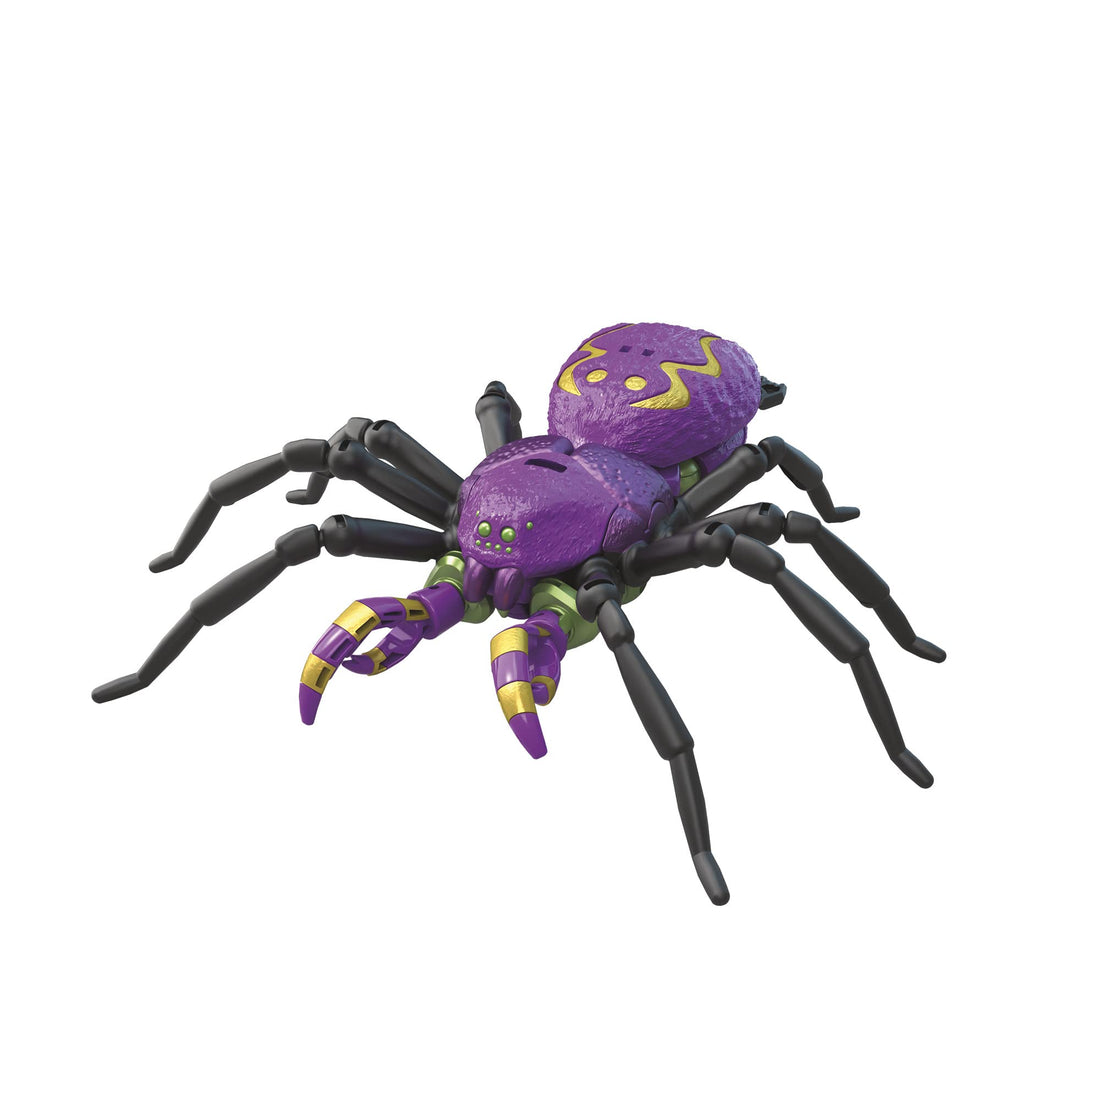 Transformers Toys Generations Legacy Deluxe Predacon Tarantulas Action Figure - 8 and Up, 5.5-inch, Multicolour (F3032)